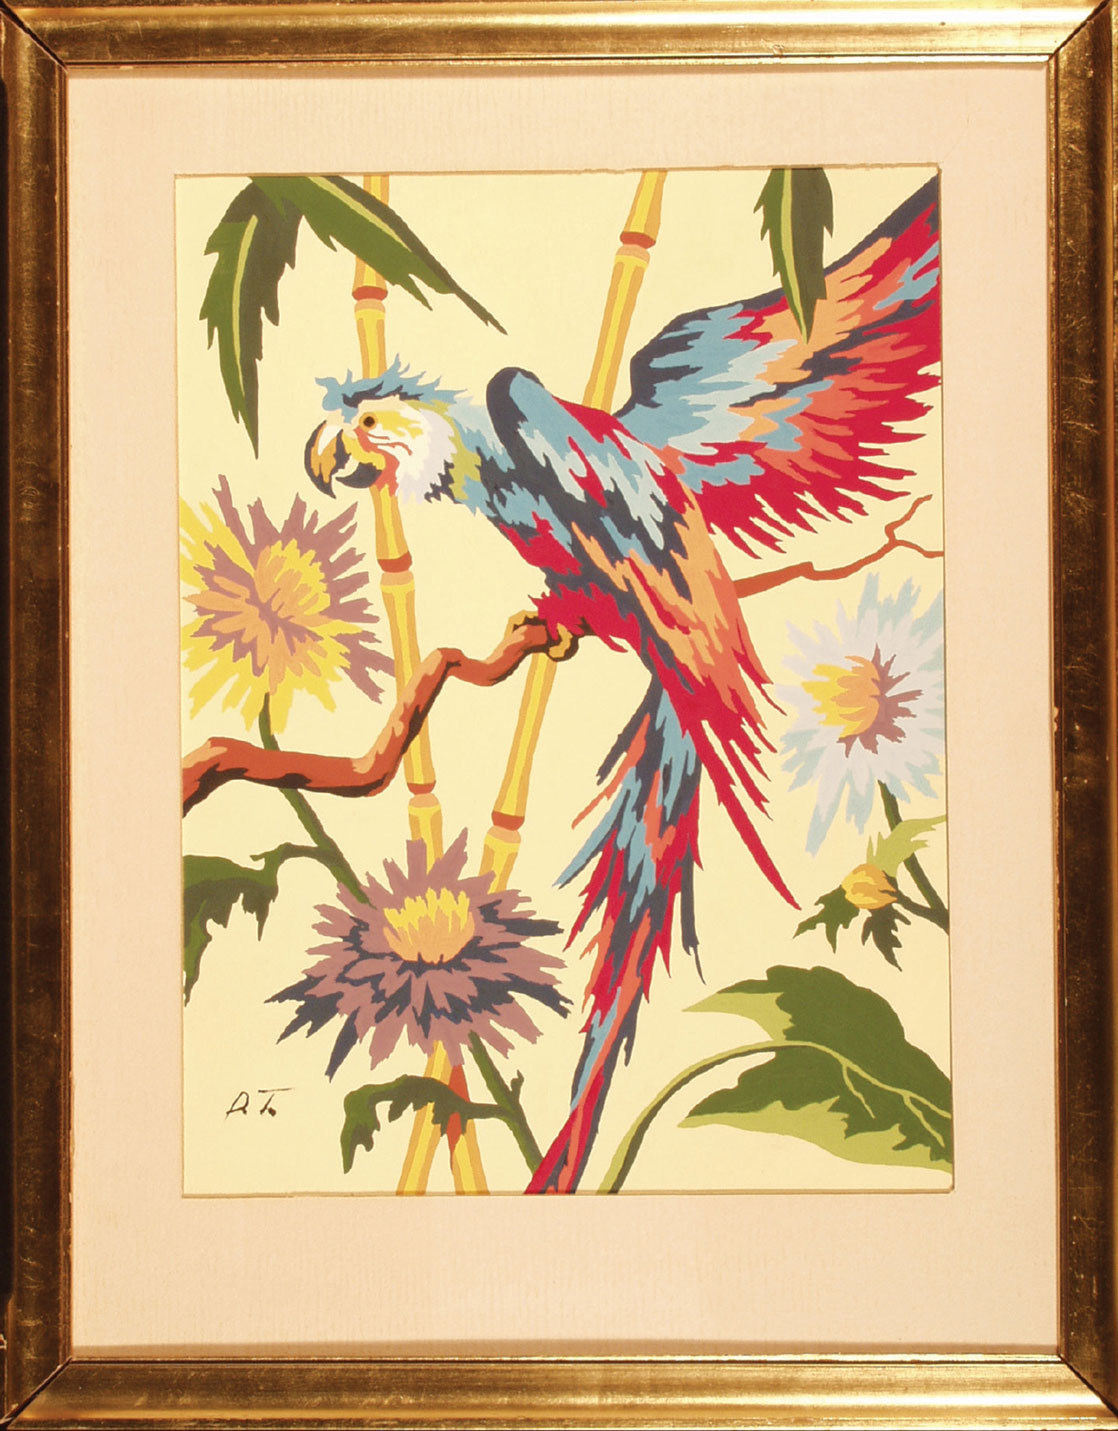 Paint by number of a parrot and flowers, completed circa 1954 by Dan Thornton, governor of Colorado.